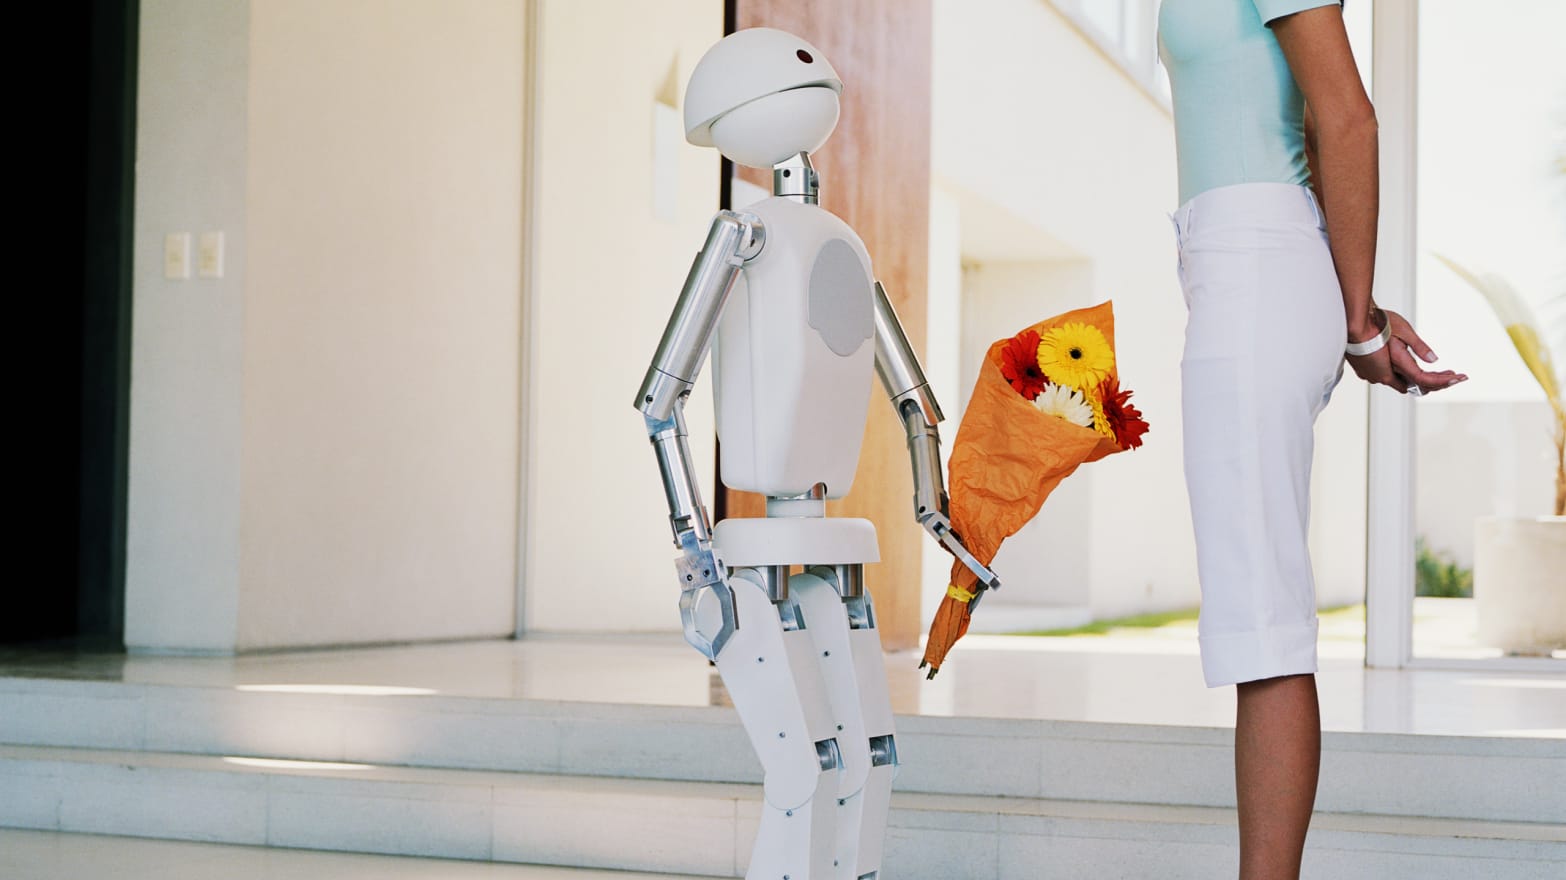 Can Robots Fall in Love, and Why Would They? image pic